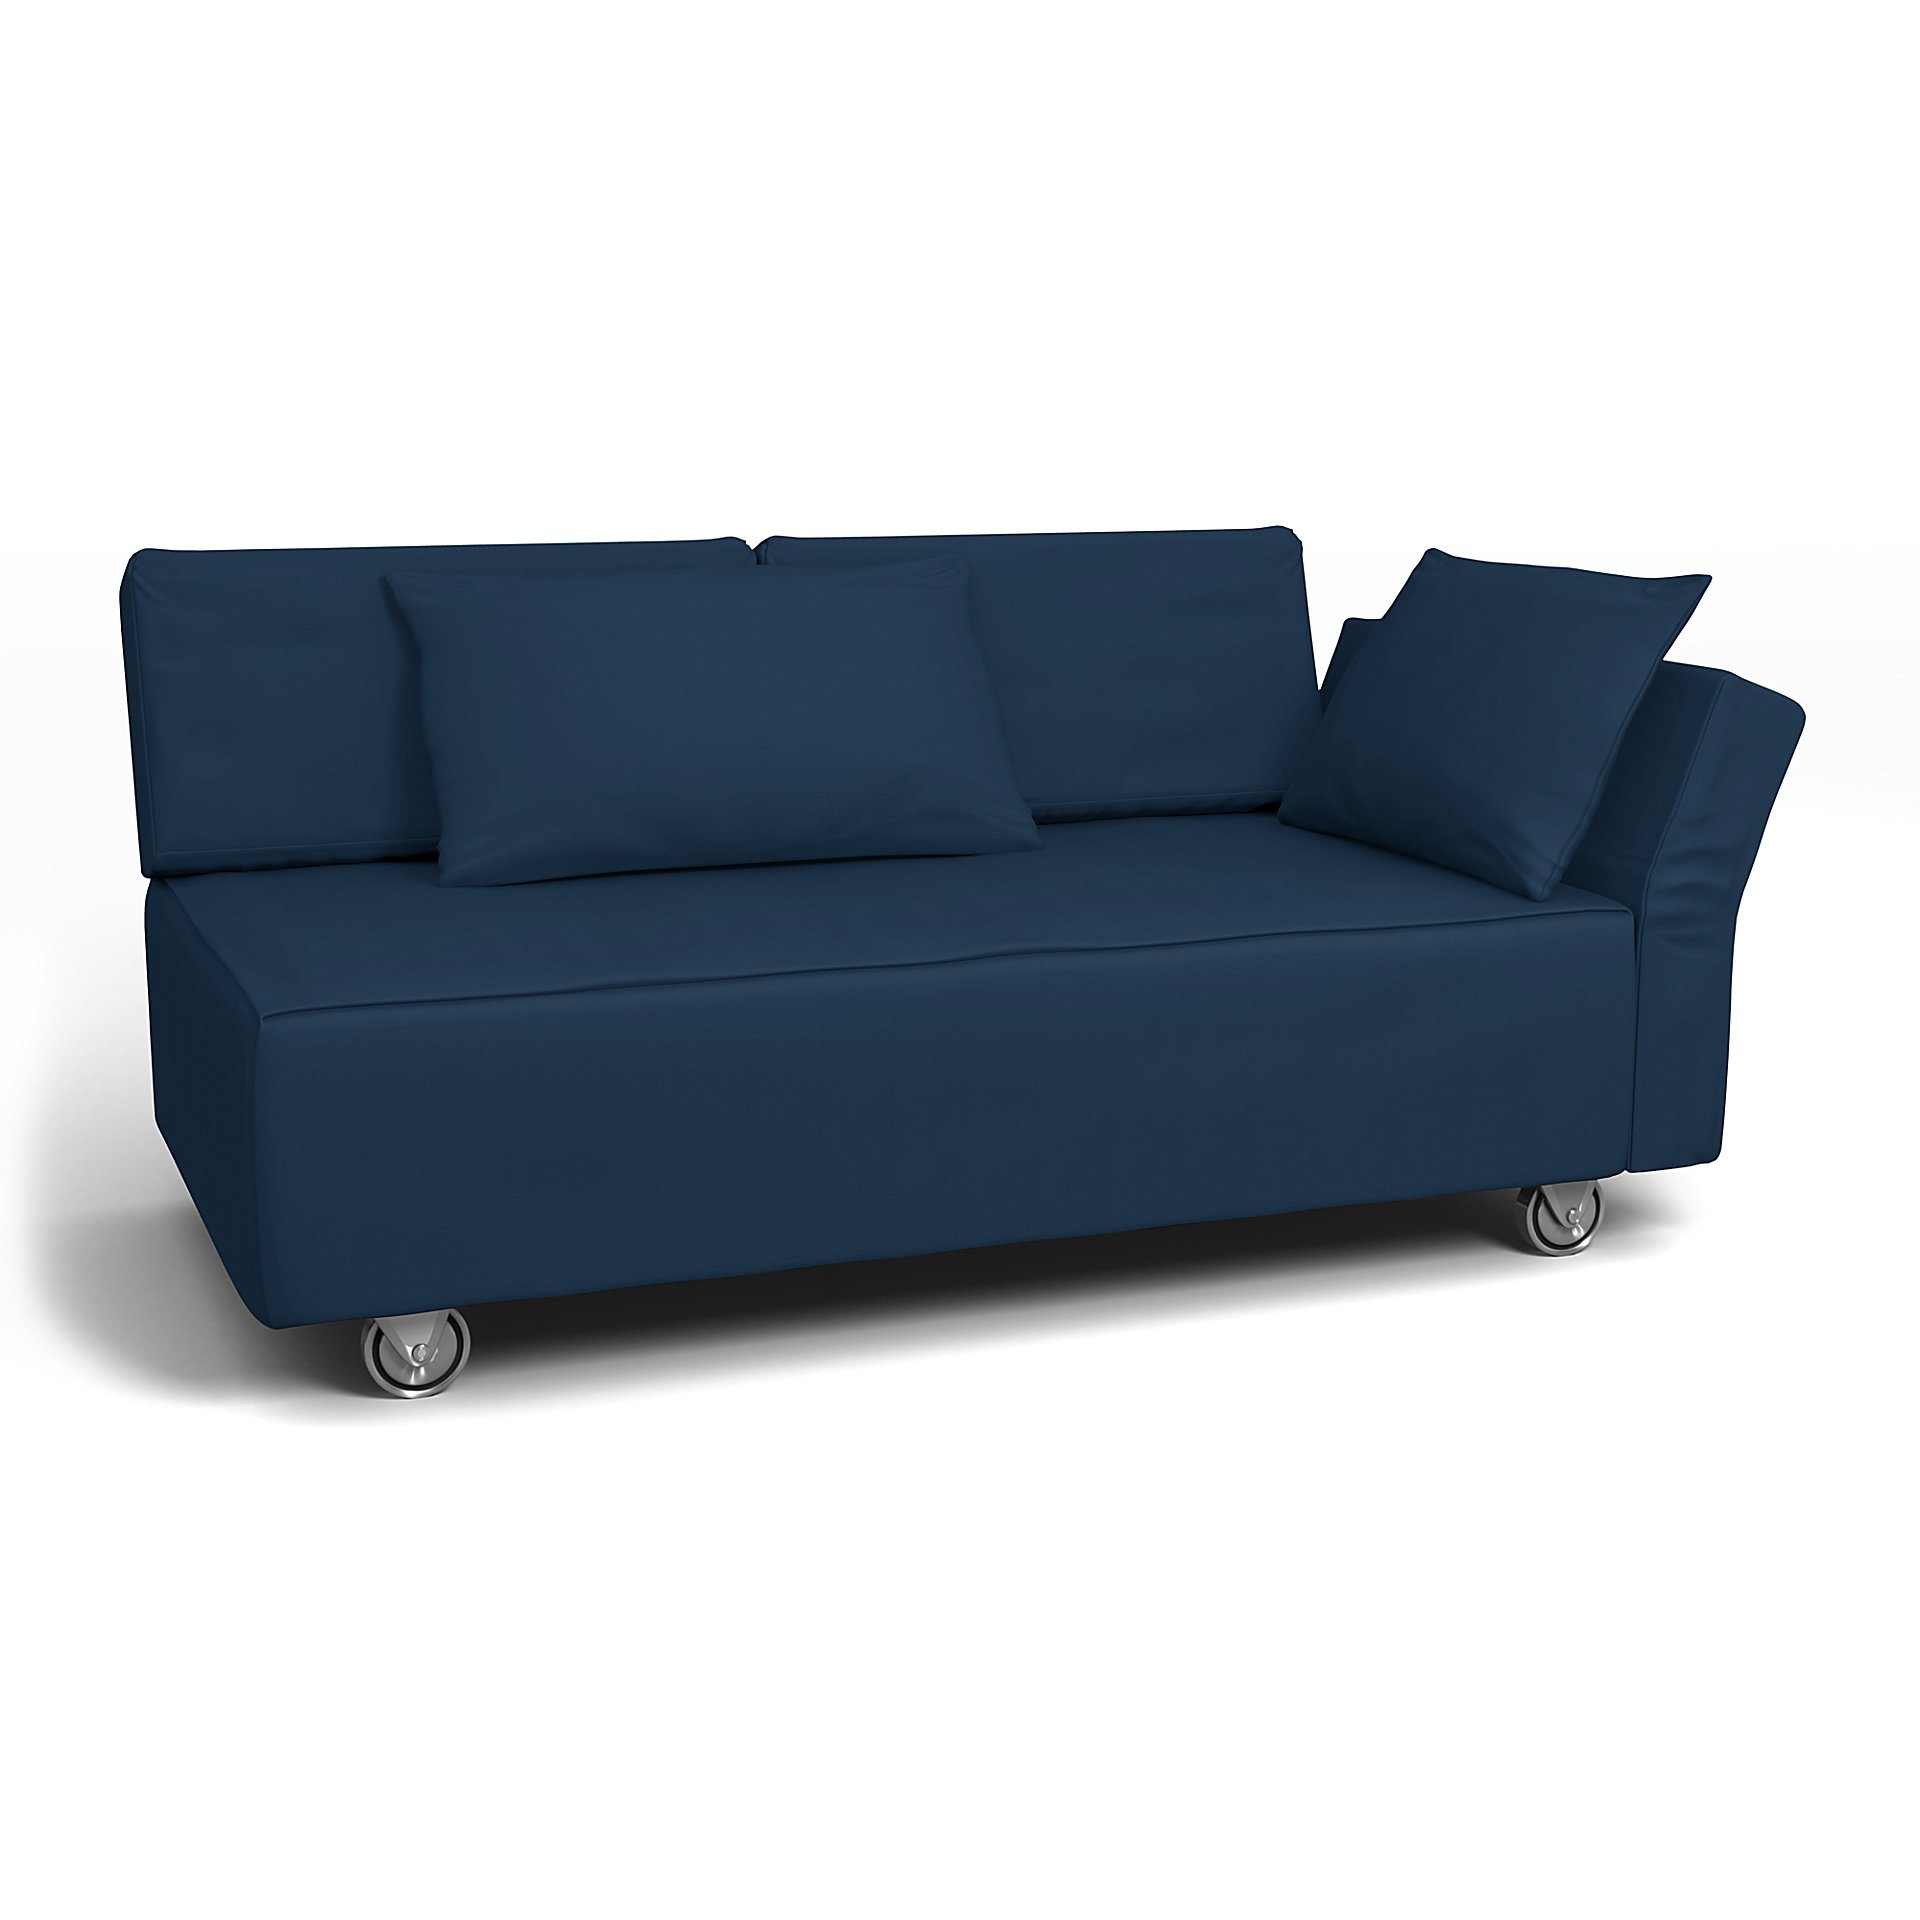 IKEA - Falsterbo 2 Seat Sofa with Right Arm Cover, Deep Navy Blue, Cotton - Bemz